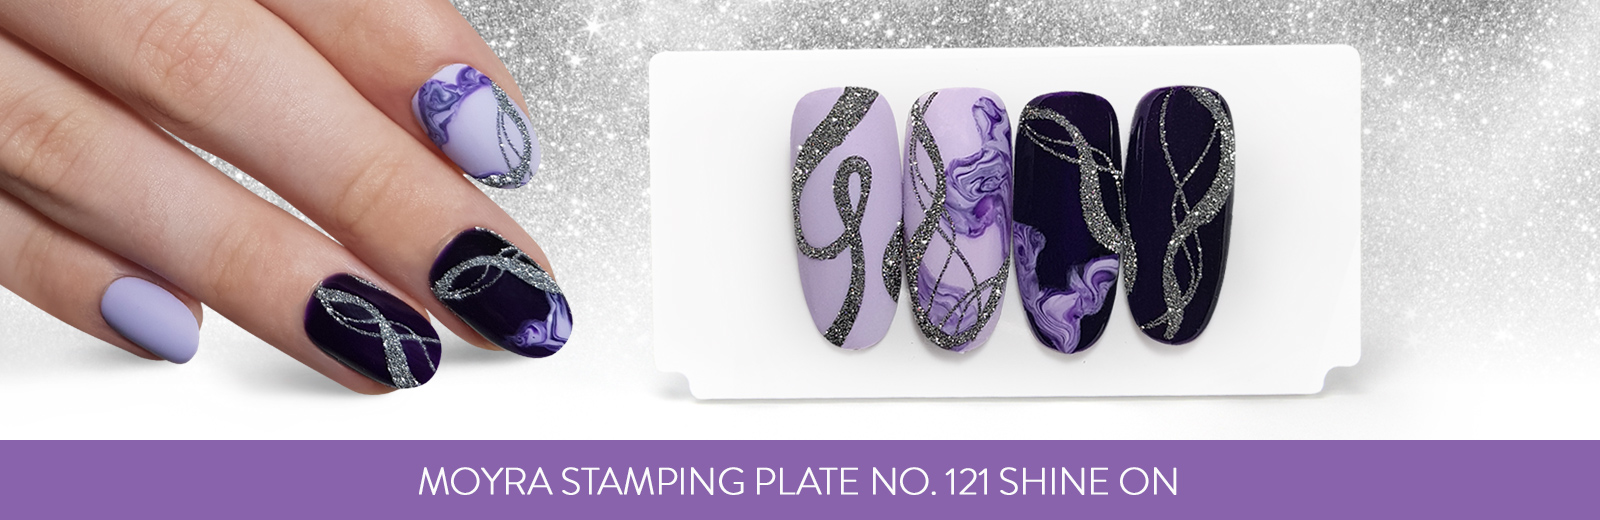 New stamping plate has arrived! No. 121 Shine on